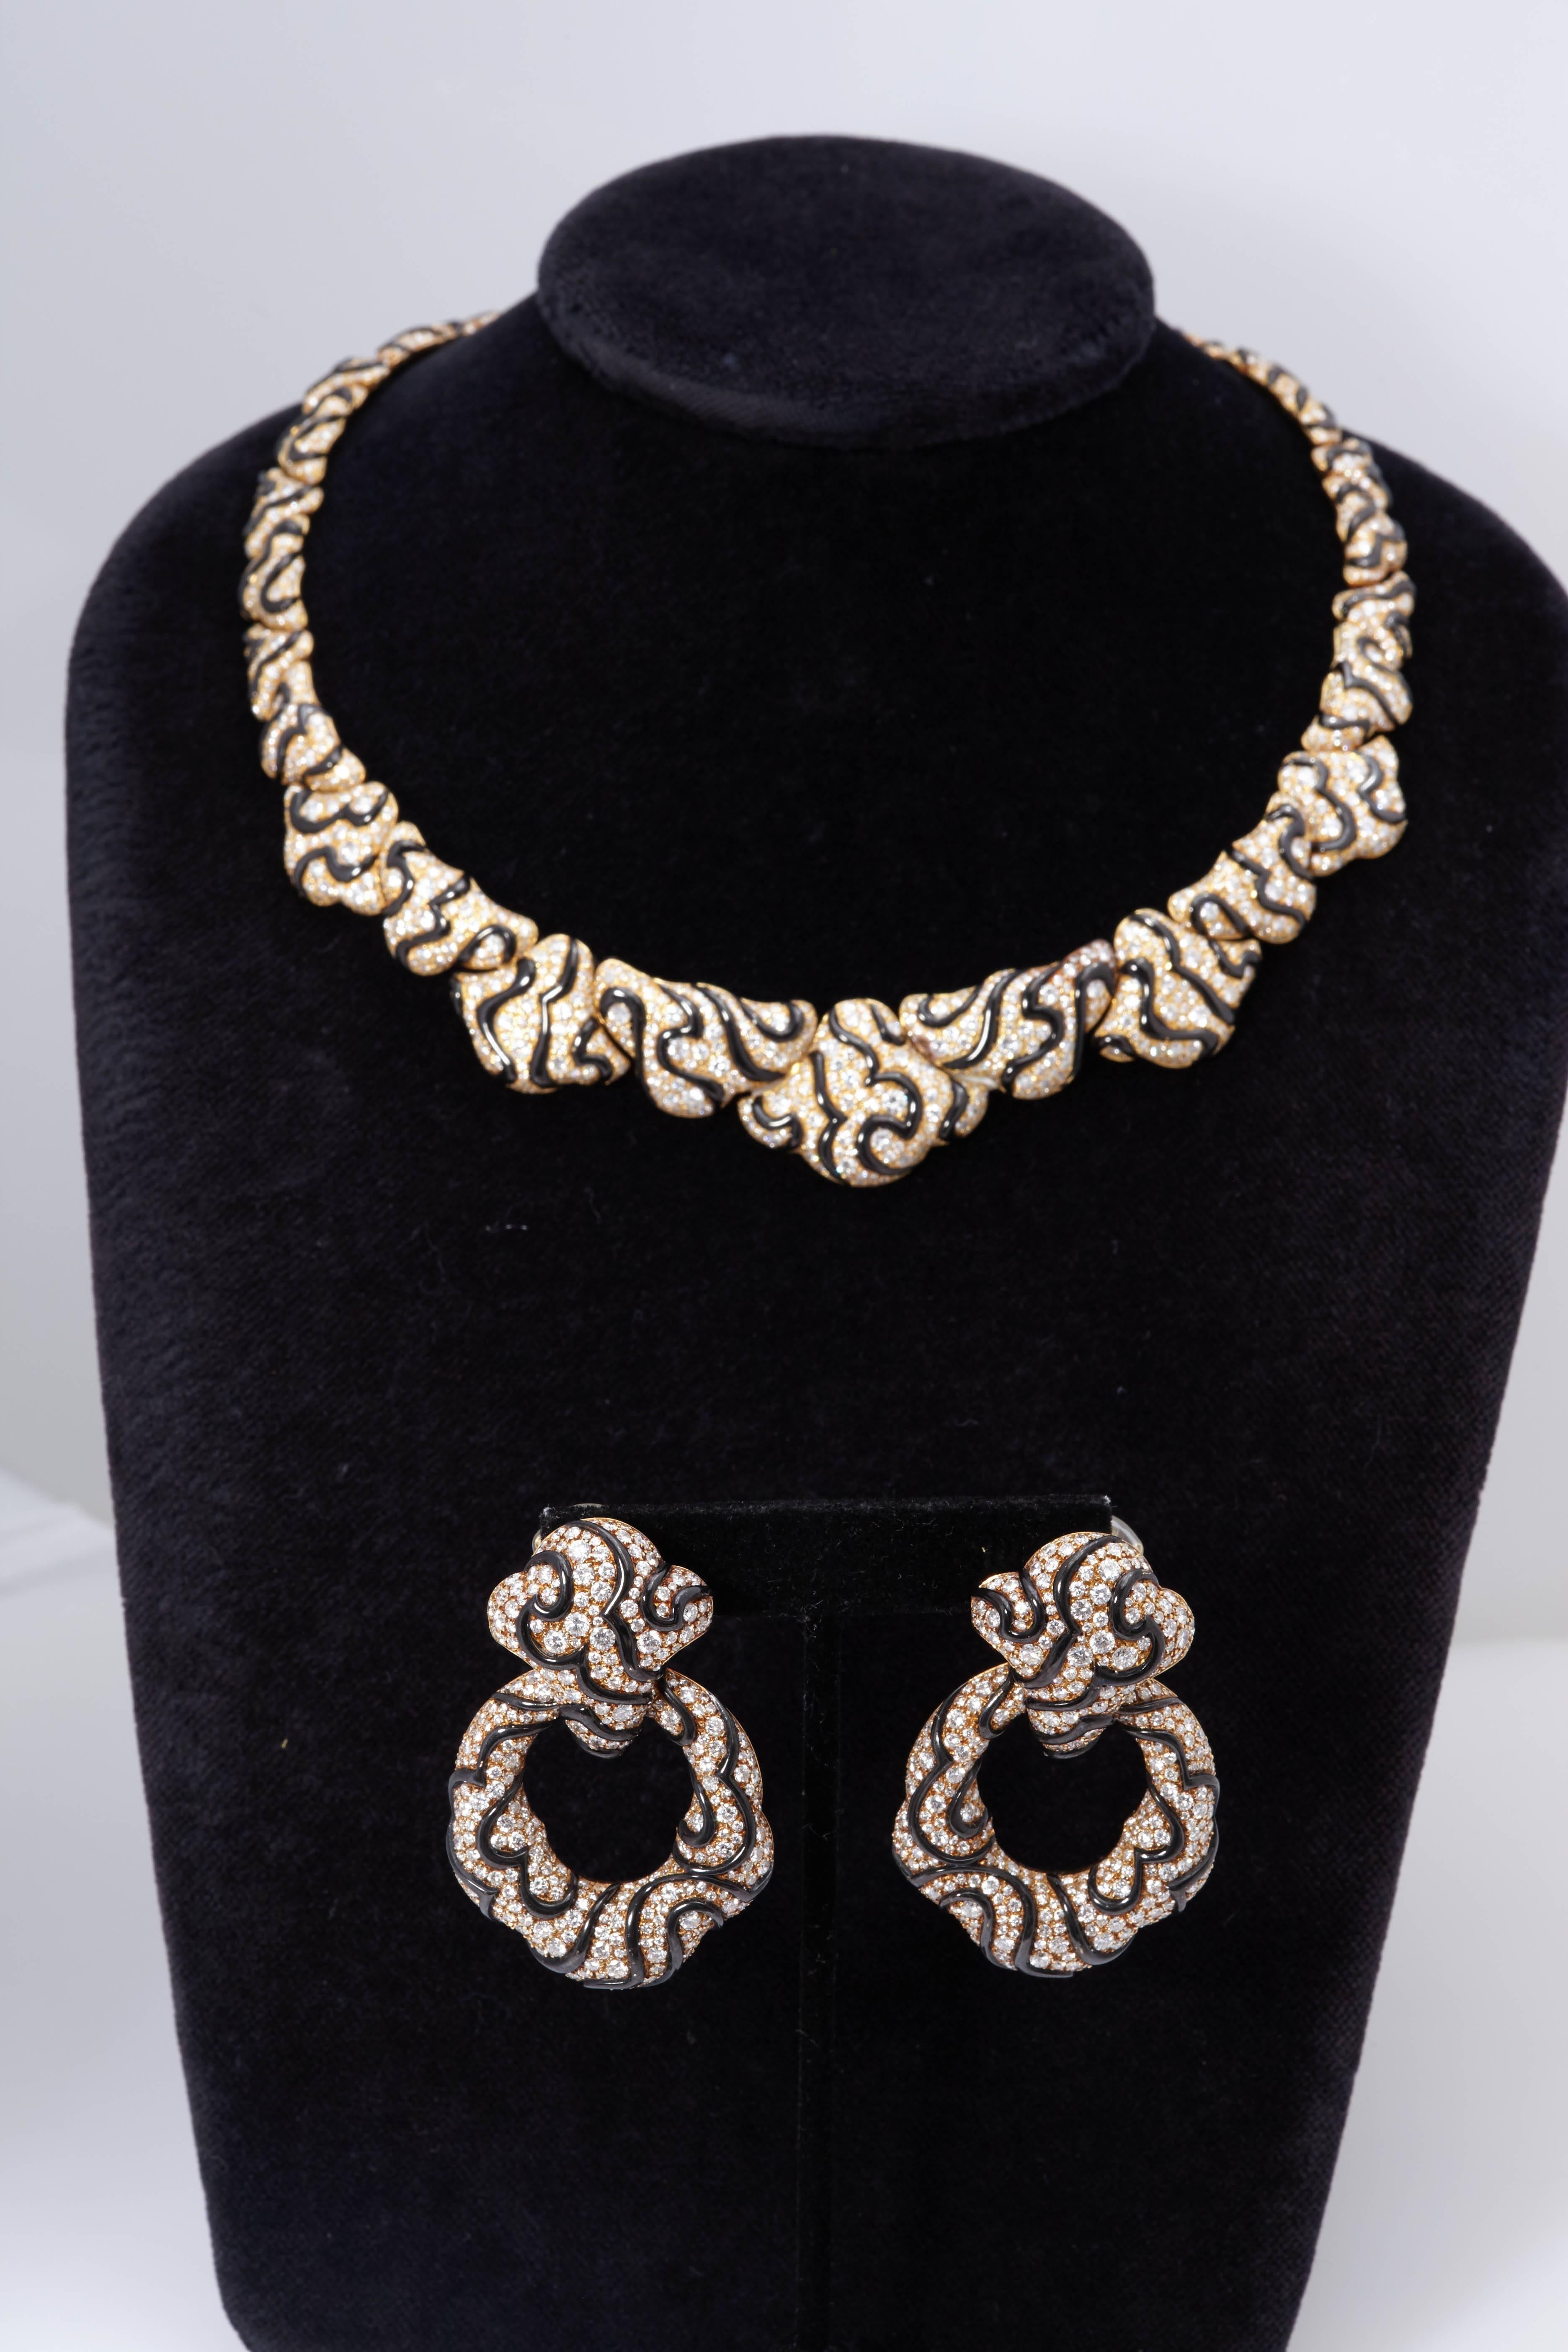 Marina B Rare Gold Necklace In Excellent Condition For Sale In New York, NY